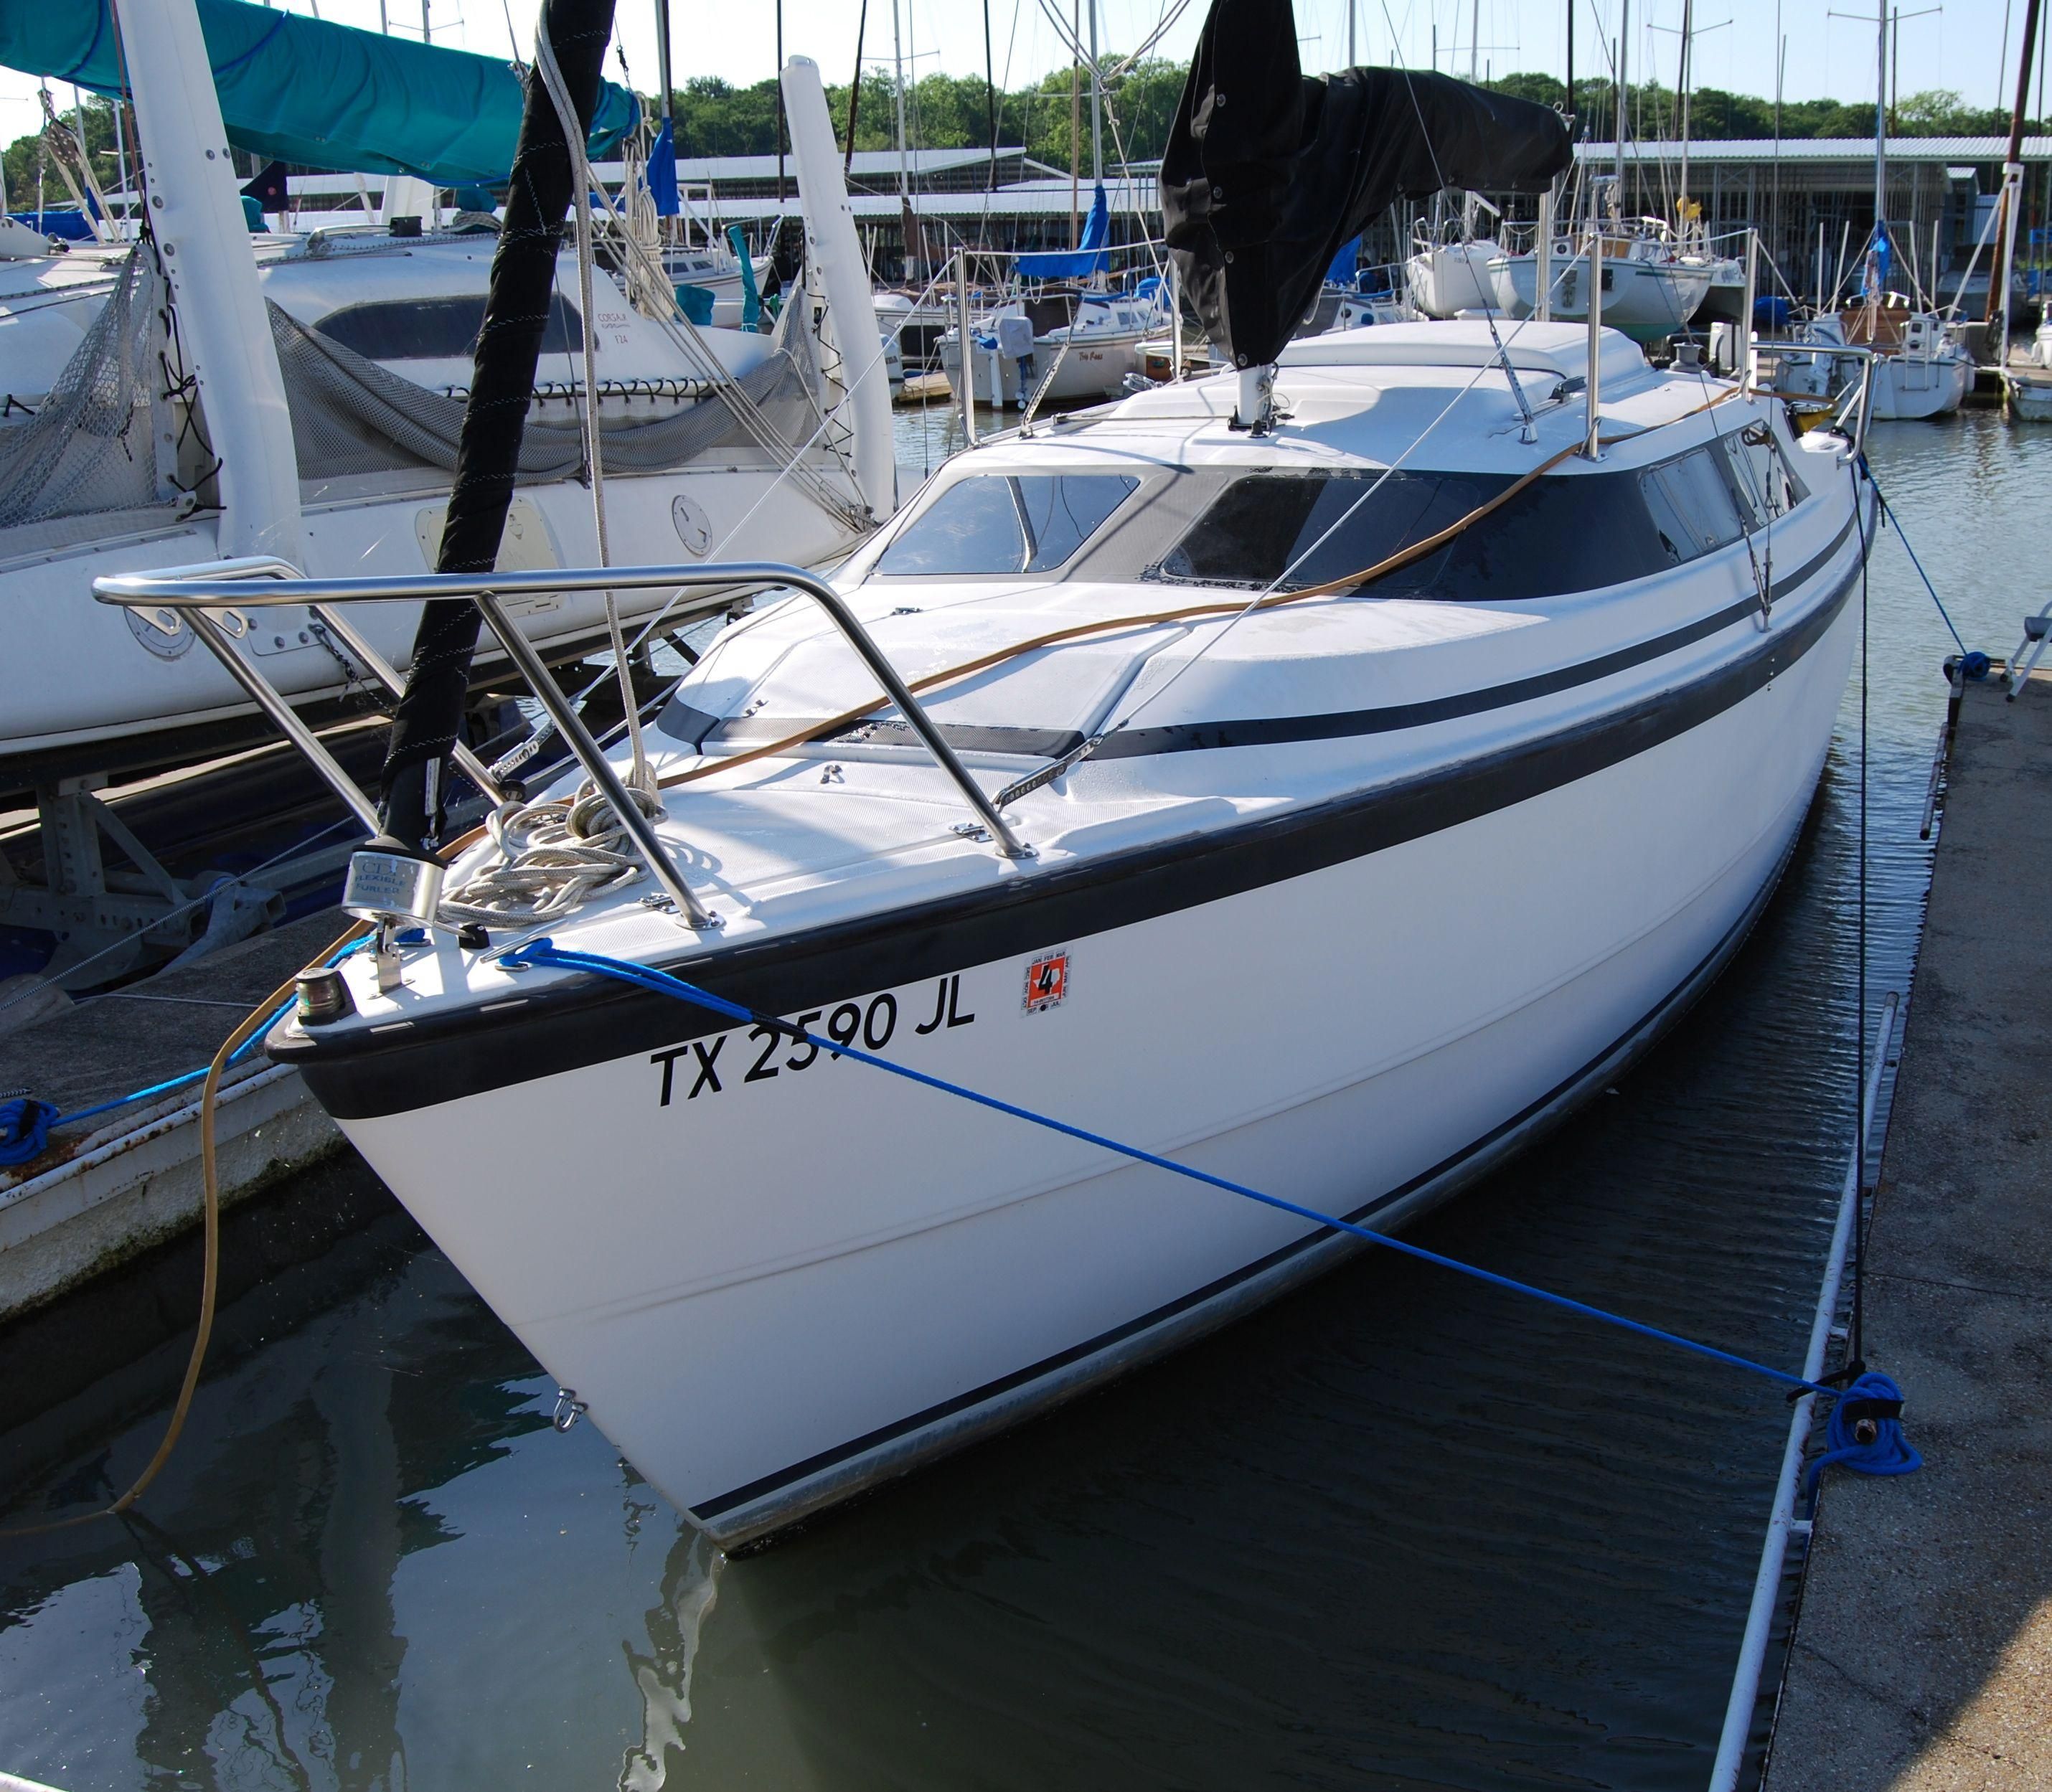 26 ft sailboat for sale